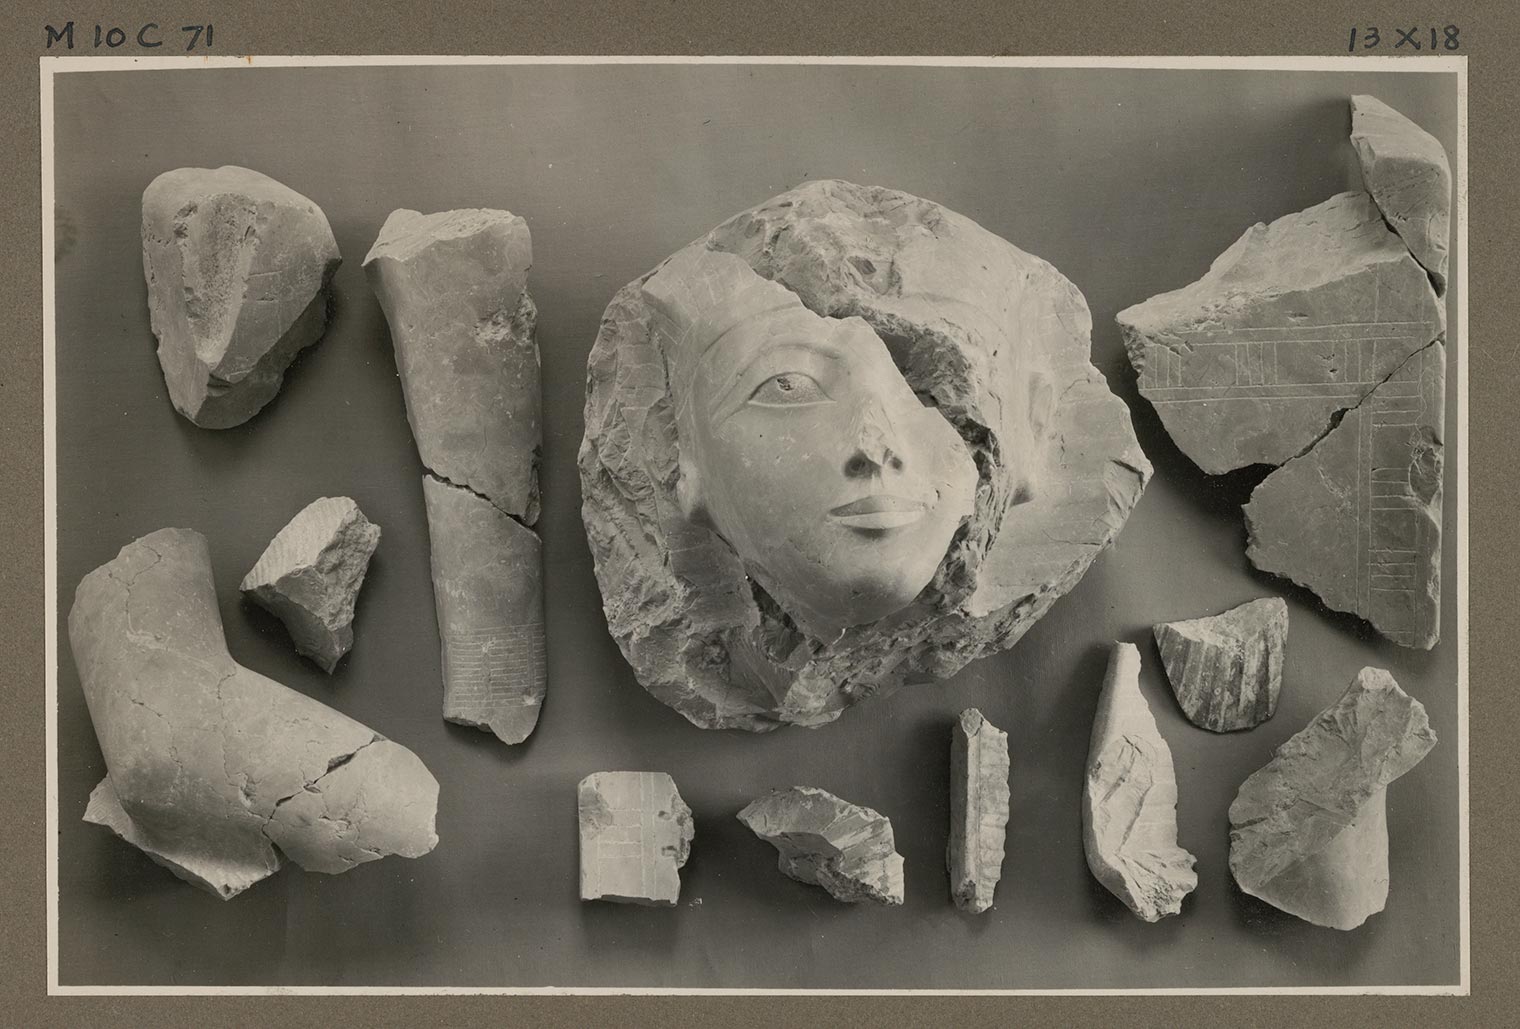 Black-and-white photograph of fragments of Hatshepsut